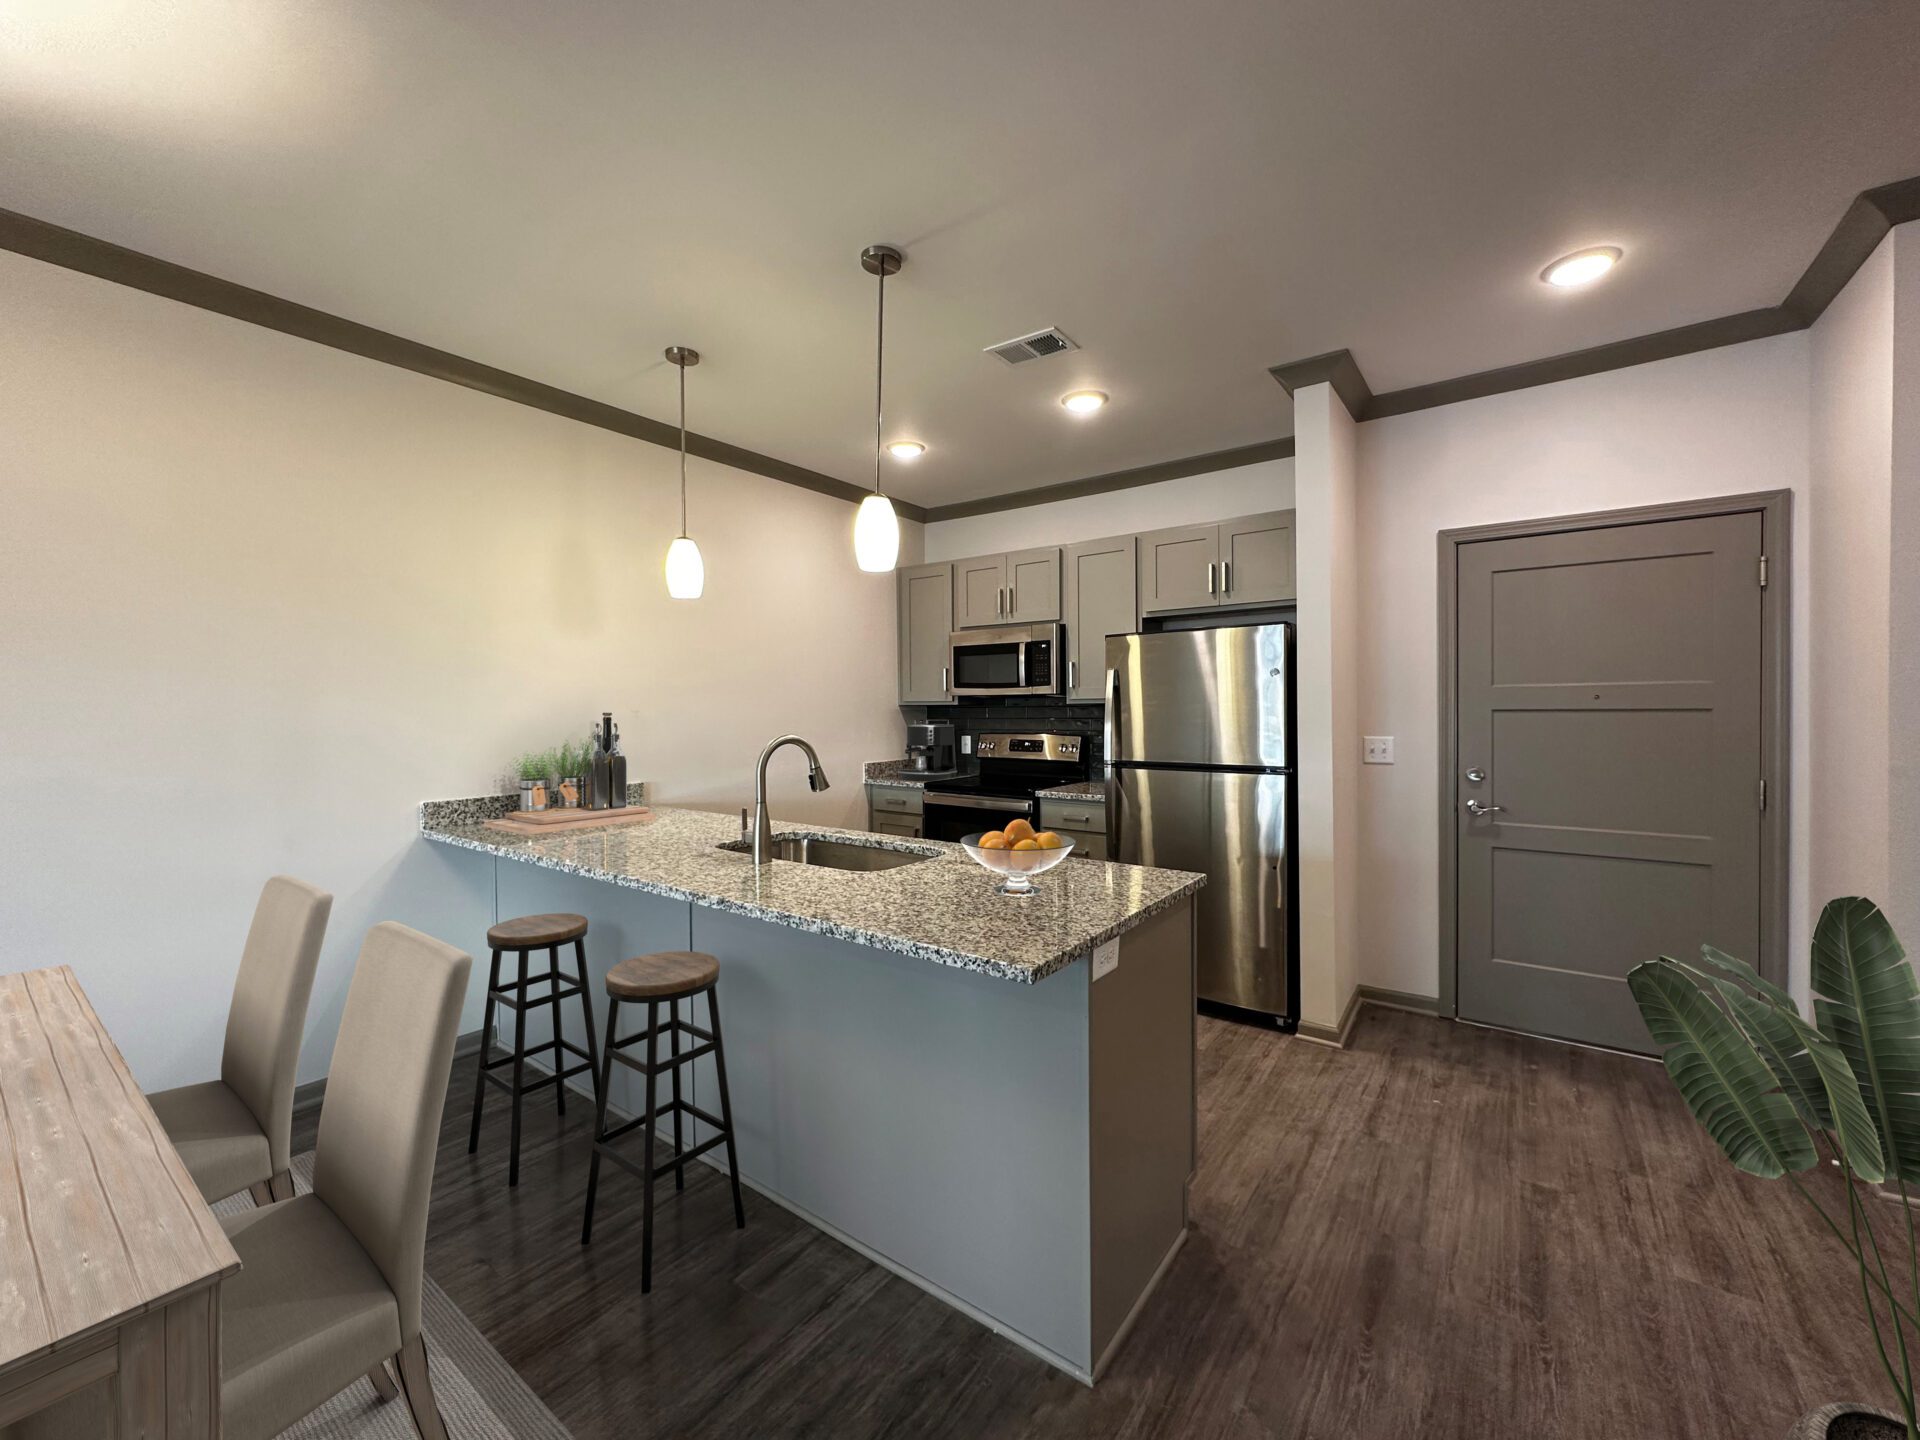 Kitchen of Treadway at New Trails Apartments